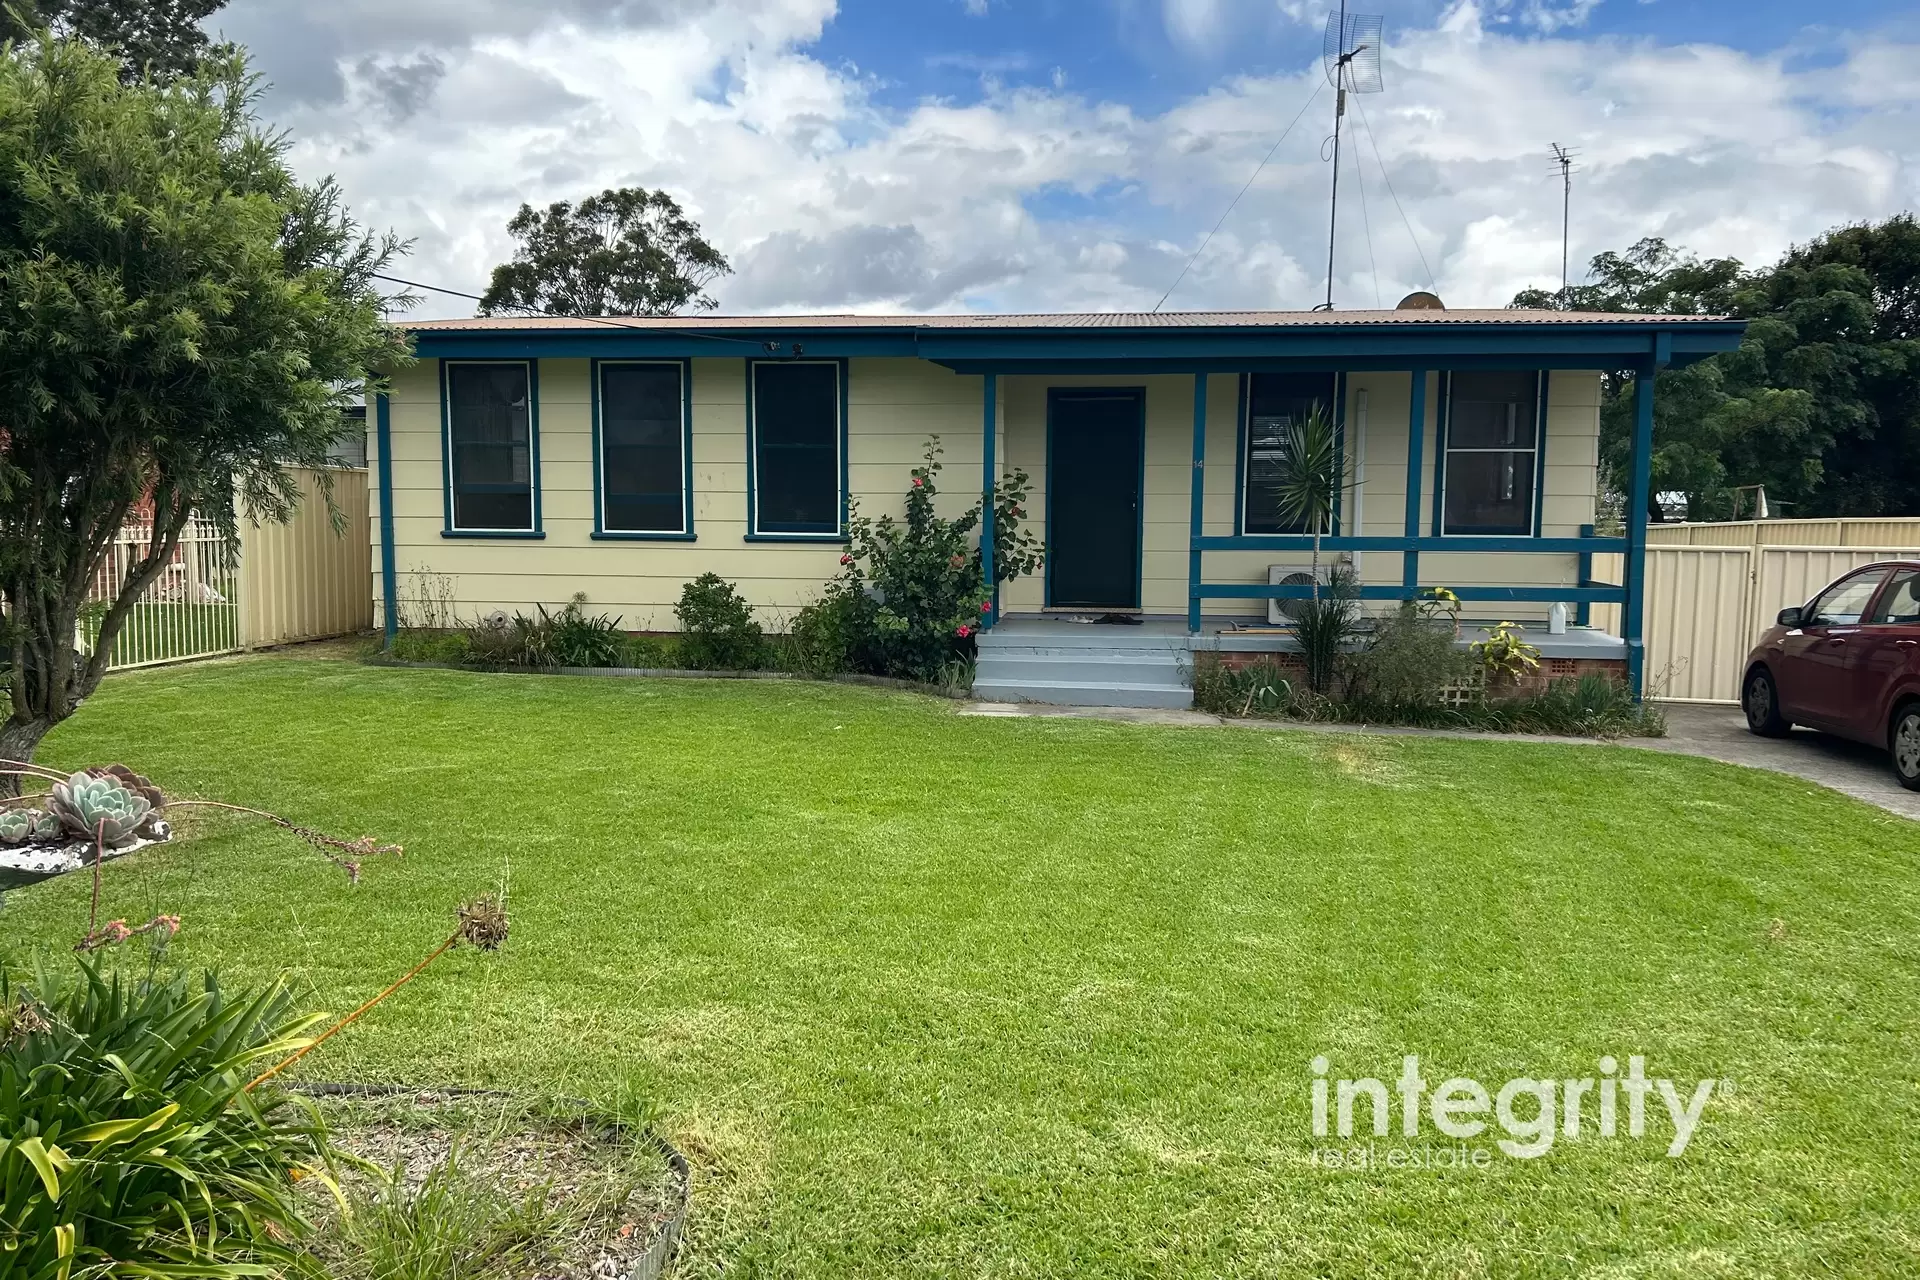 14 Quiberon Street, Nowra Leased by Integrity Real Estate